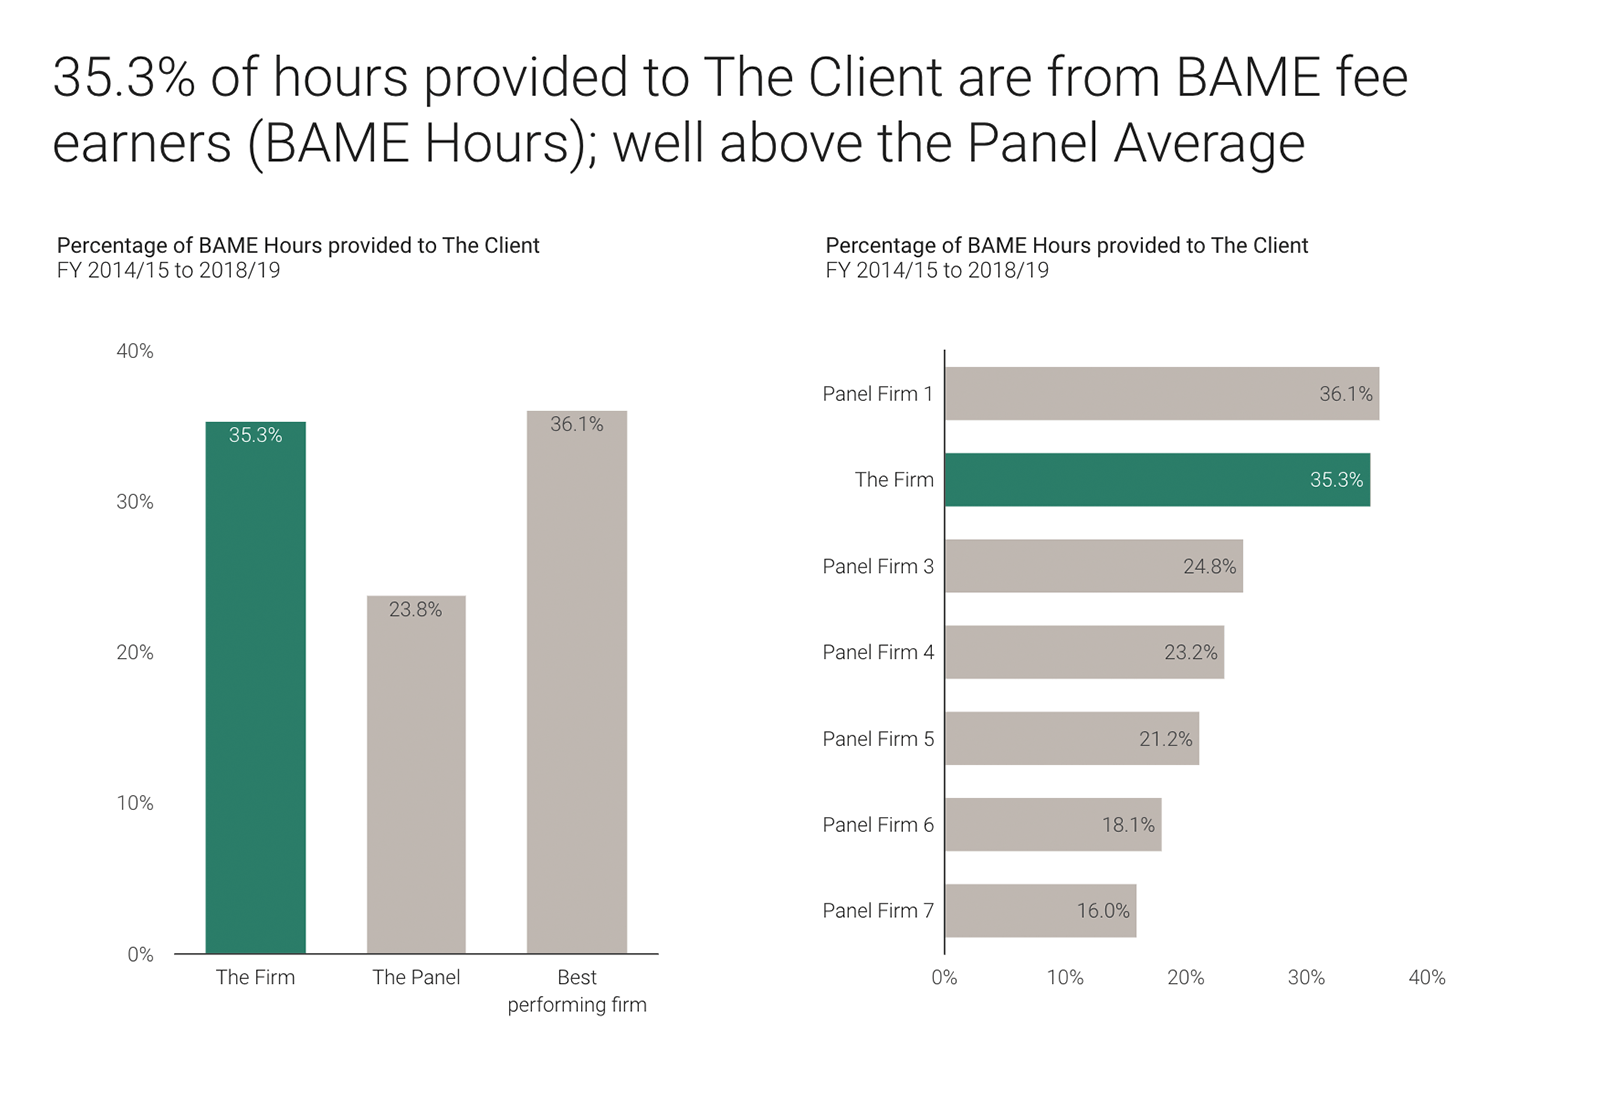 ‘35.3% of hours provided to The Client are from BAME fee earners (BAME Hours); well above the Panel Average’. Fictional data for illustration only.